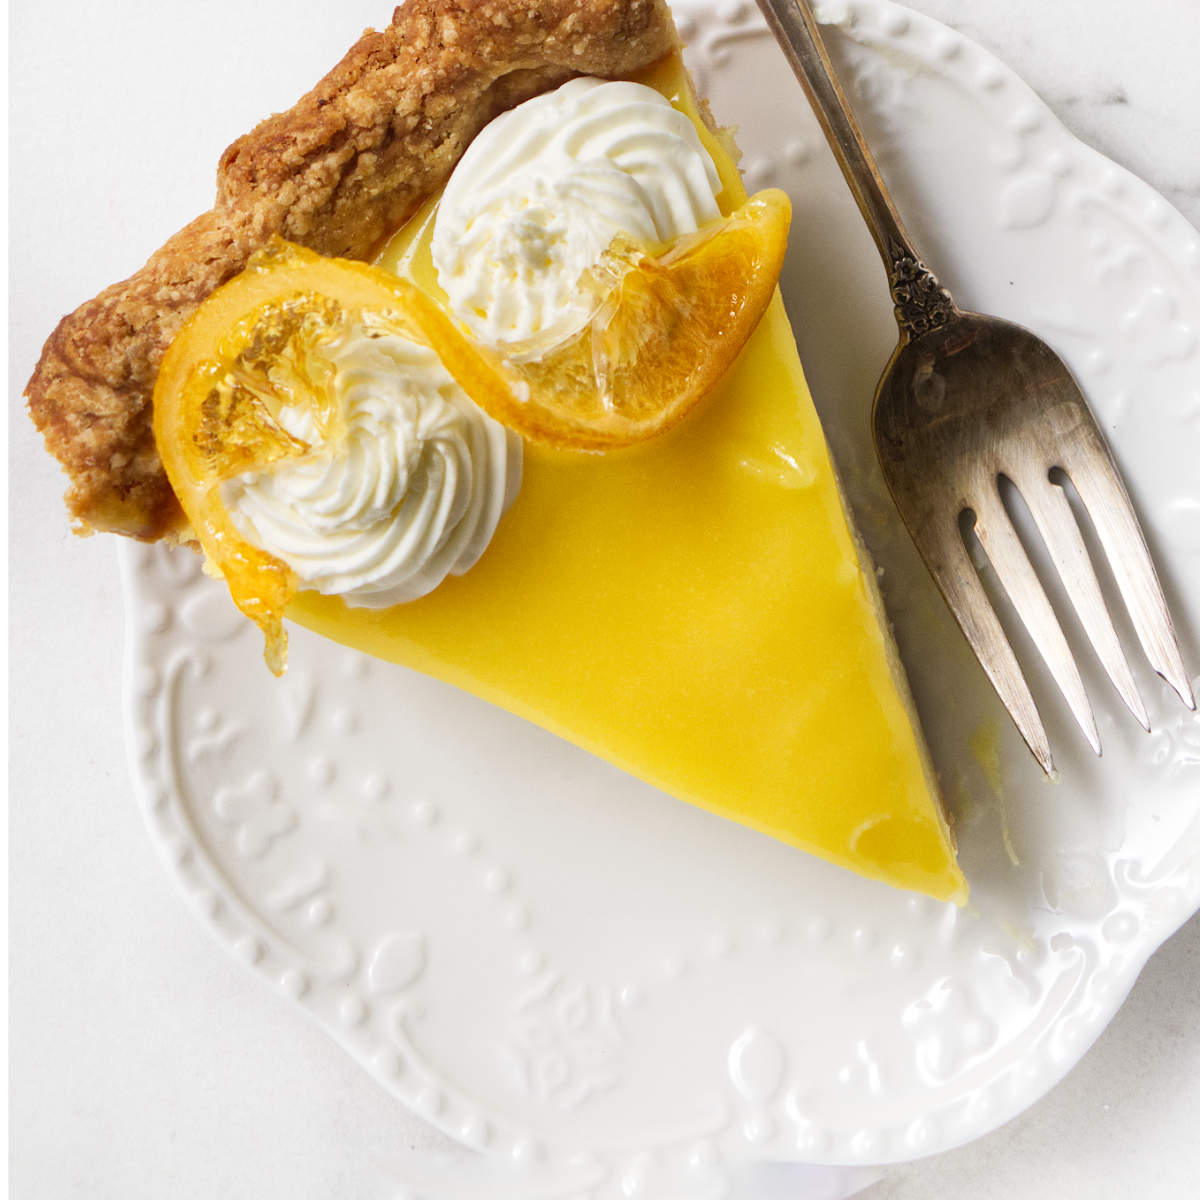 A slice of lemon custard pie topped with candied lemon slices.